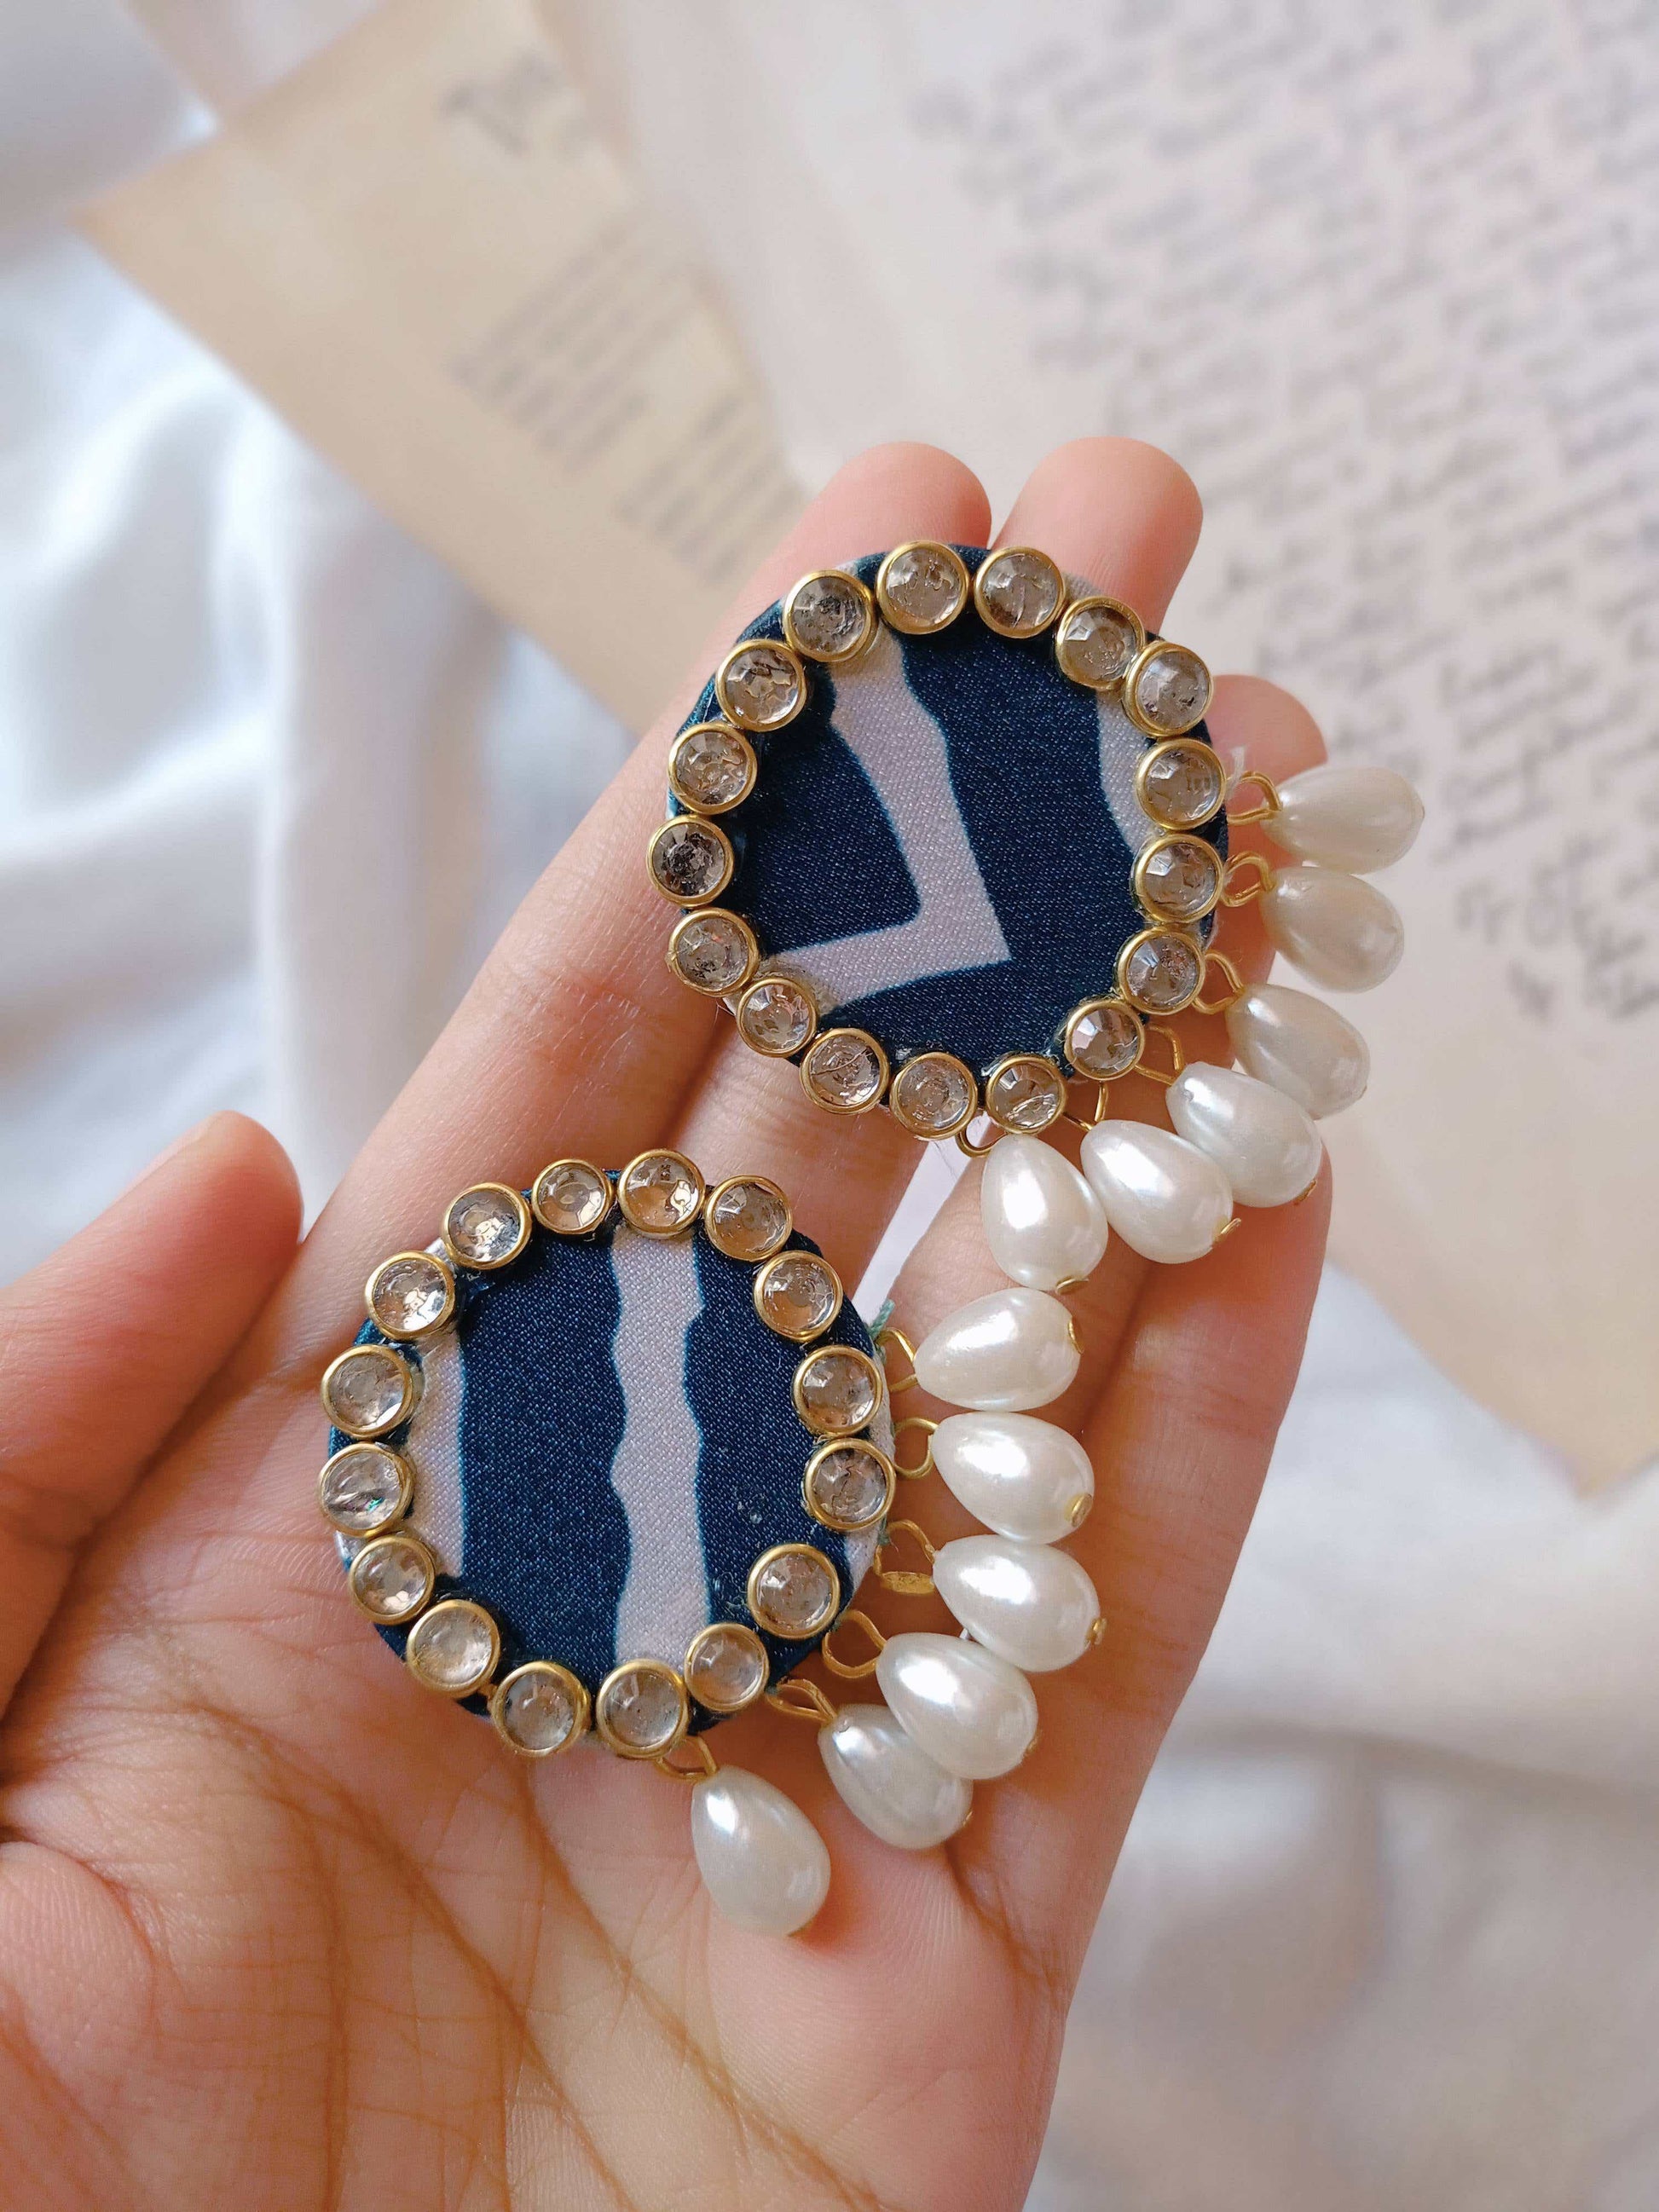 Hand holding blue printed round studs earrings with kundan border and white pearls